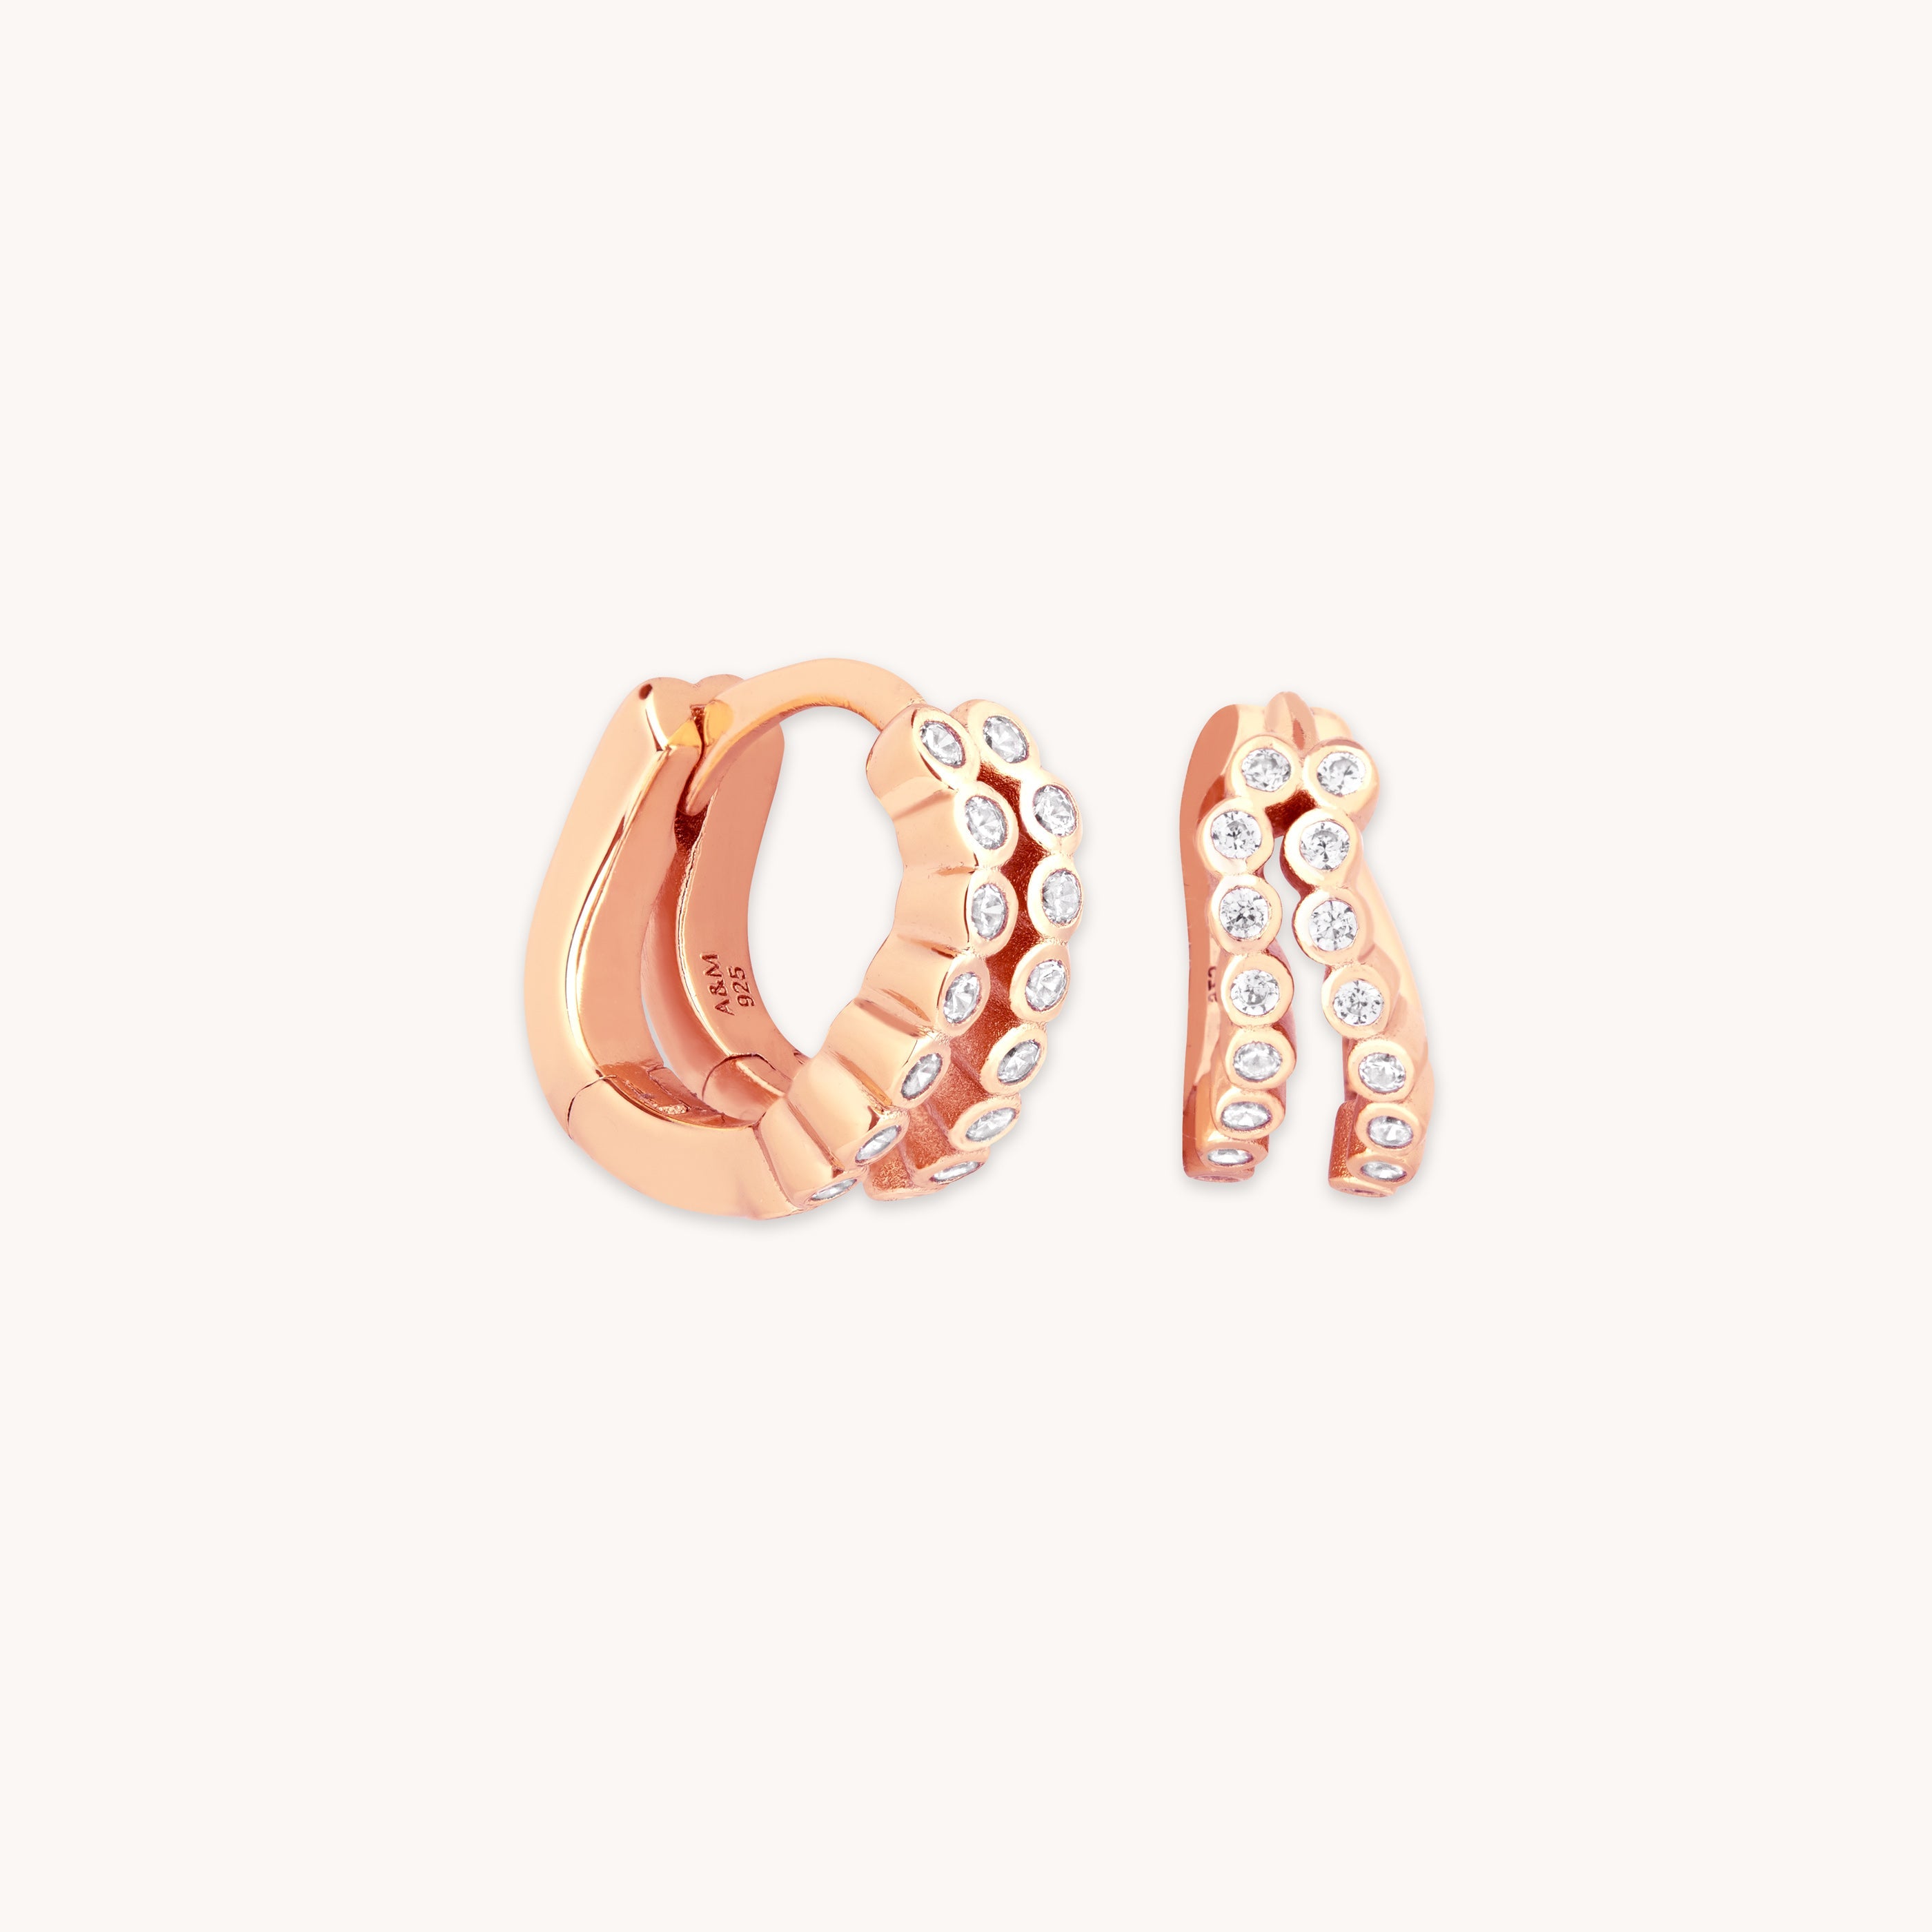 Discover 199+ solid rose gold earrings super hot